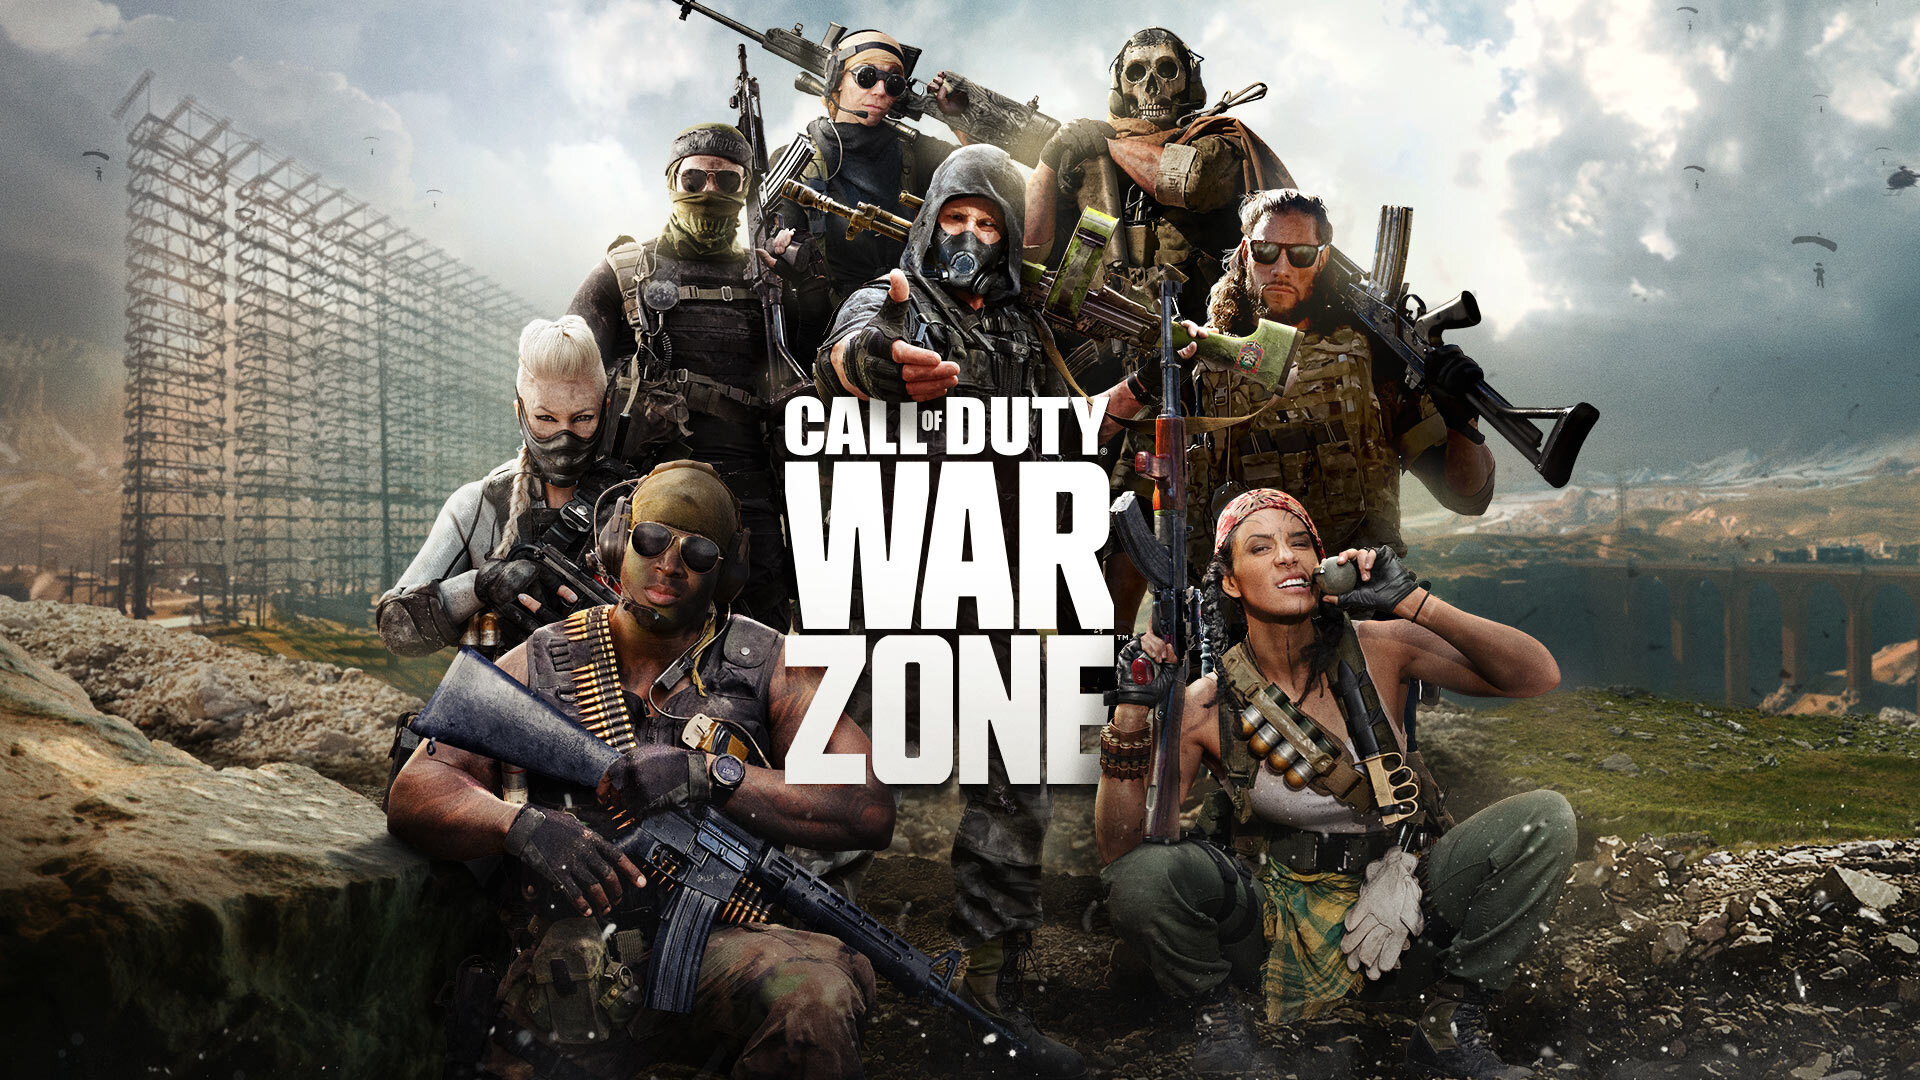 Call of duty new. Call of Duty Warzone. Call of Duty Warzone 2. Call of Duty ваrzonee 2. Call of Duty Warzone poster.